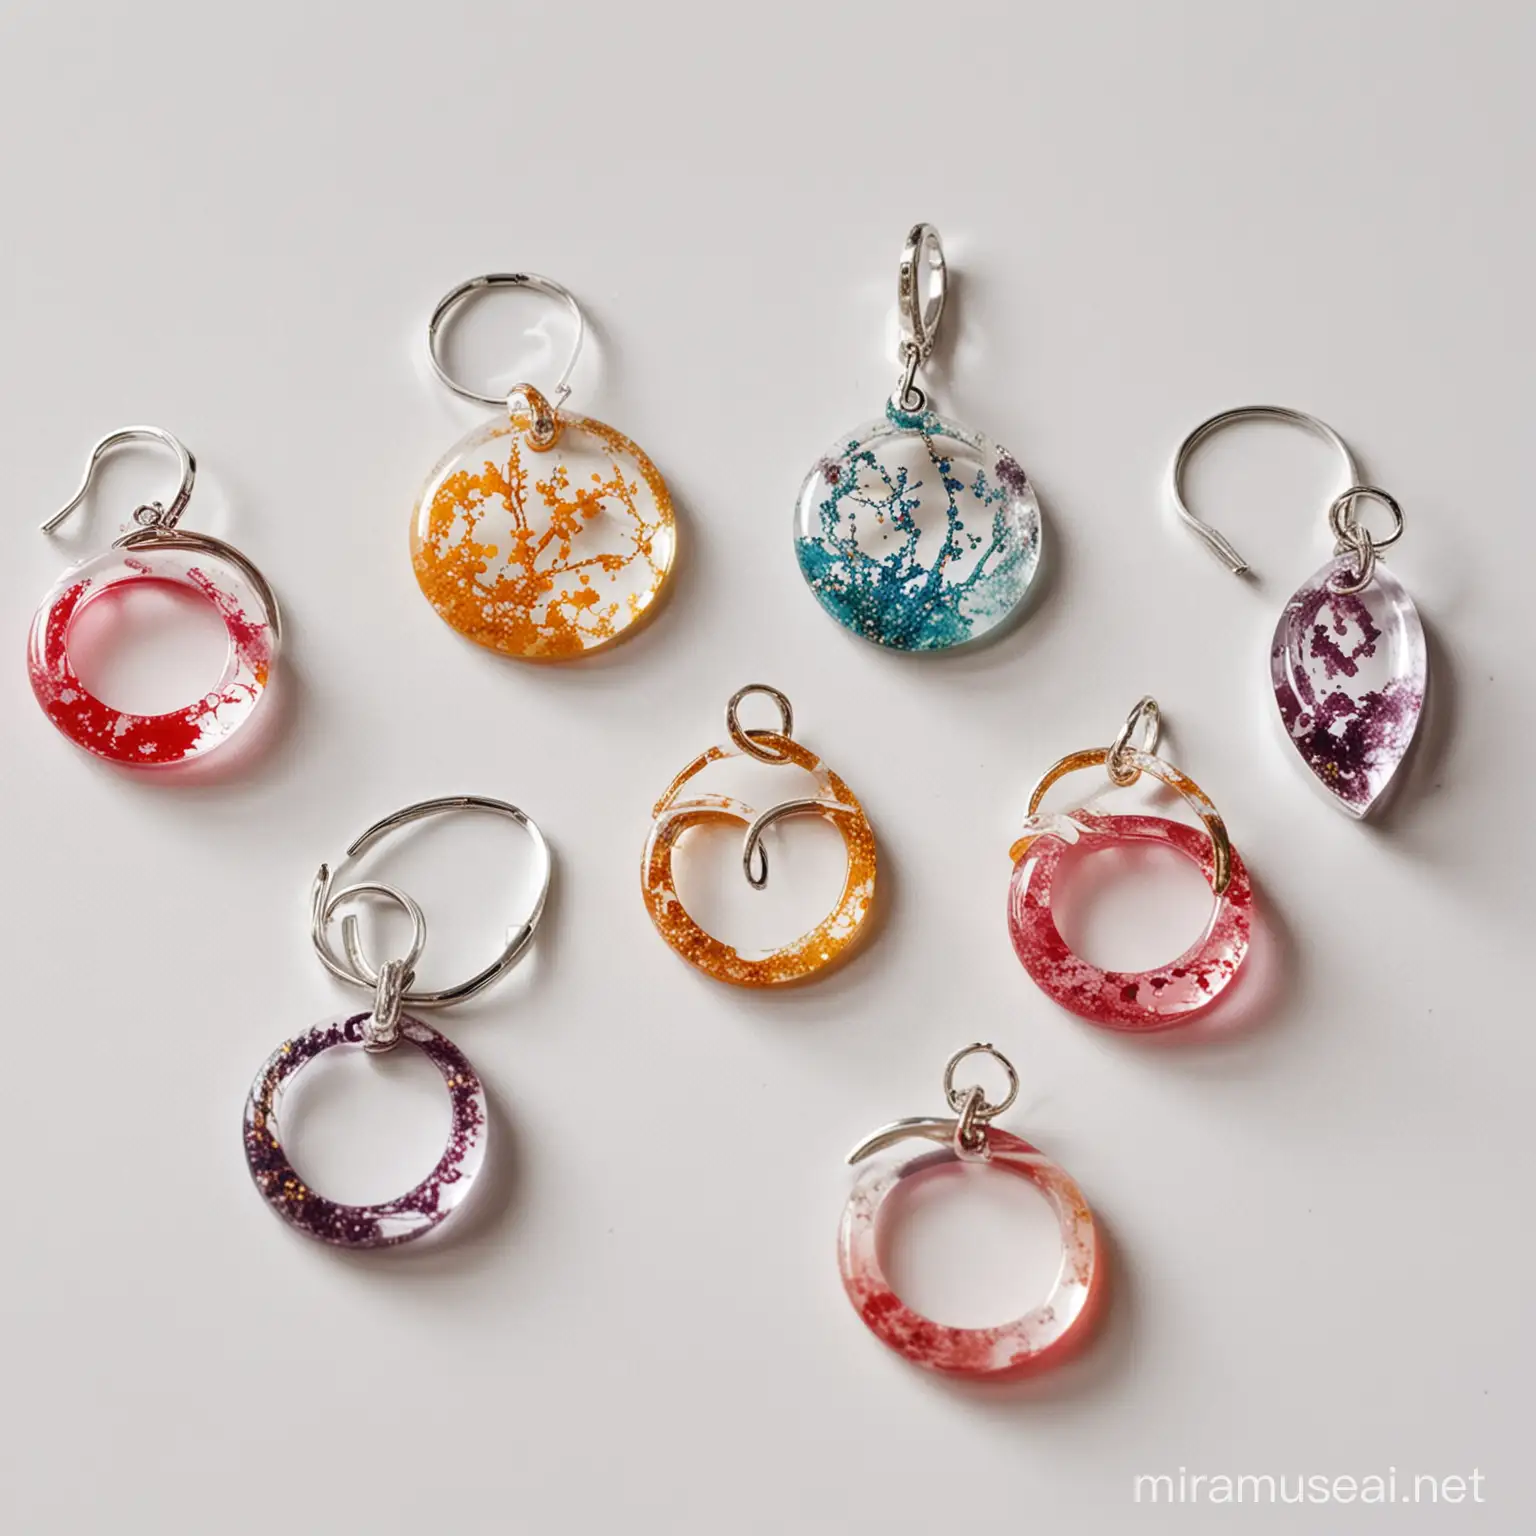 give  some nice jewellery like pendents rings and earing made of epoxy resin with a white background